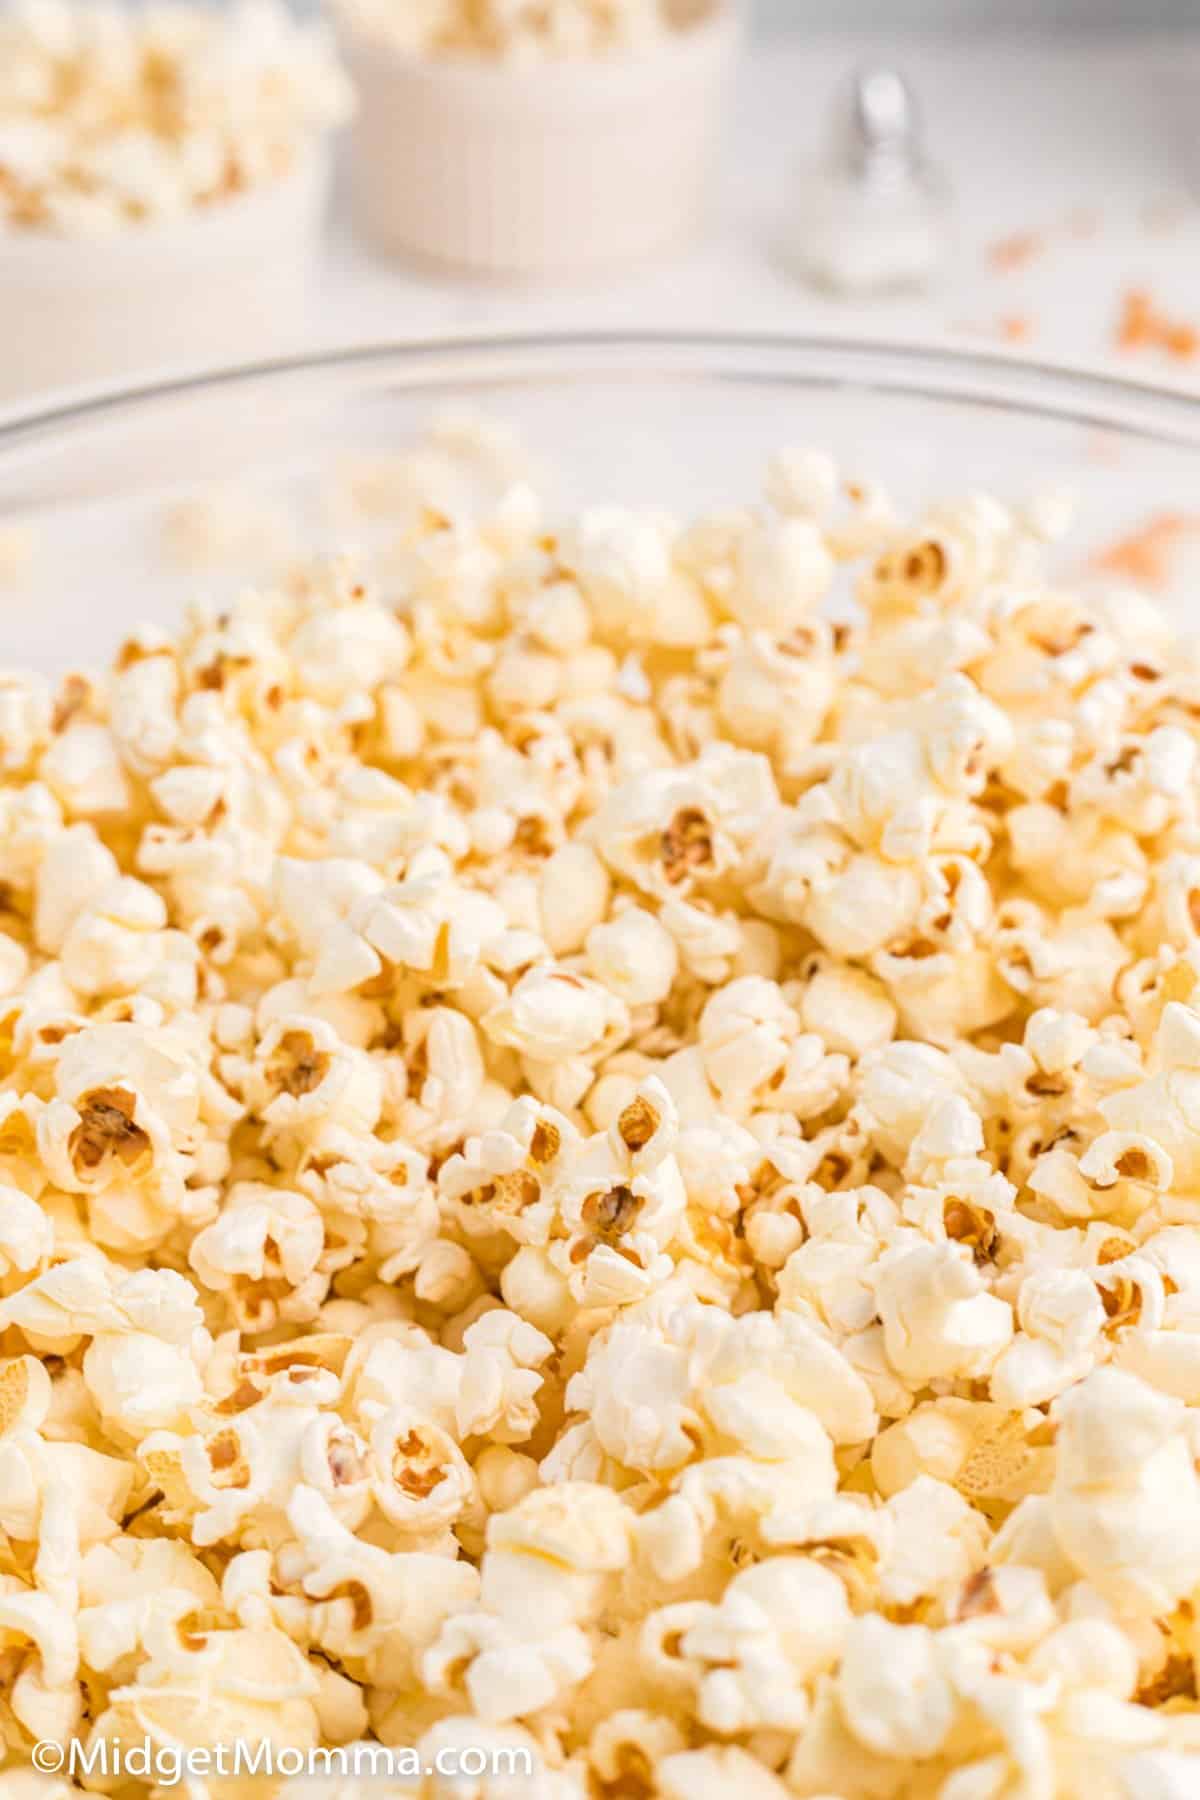 Kettle Corn Recipe at Home Using Secret Ingredients - Happy Haute Home